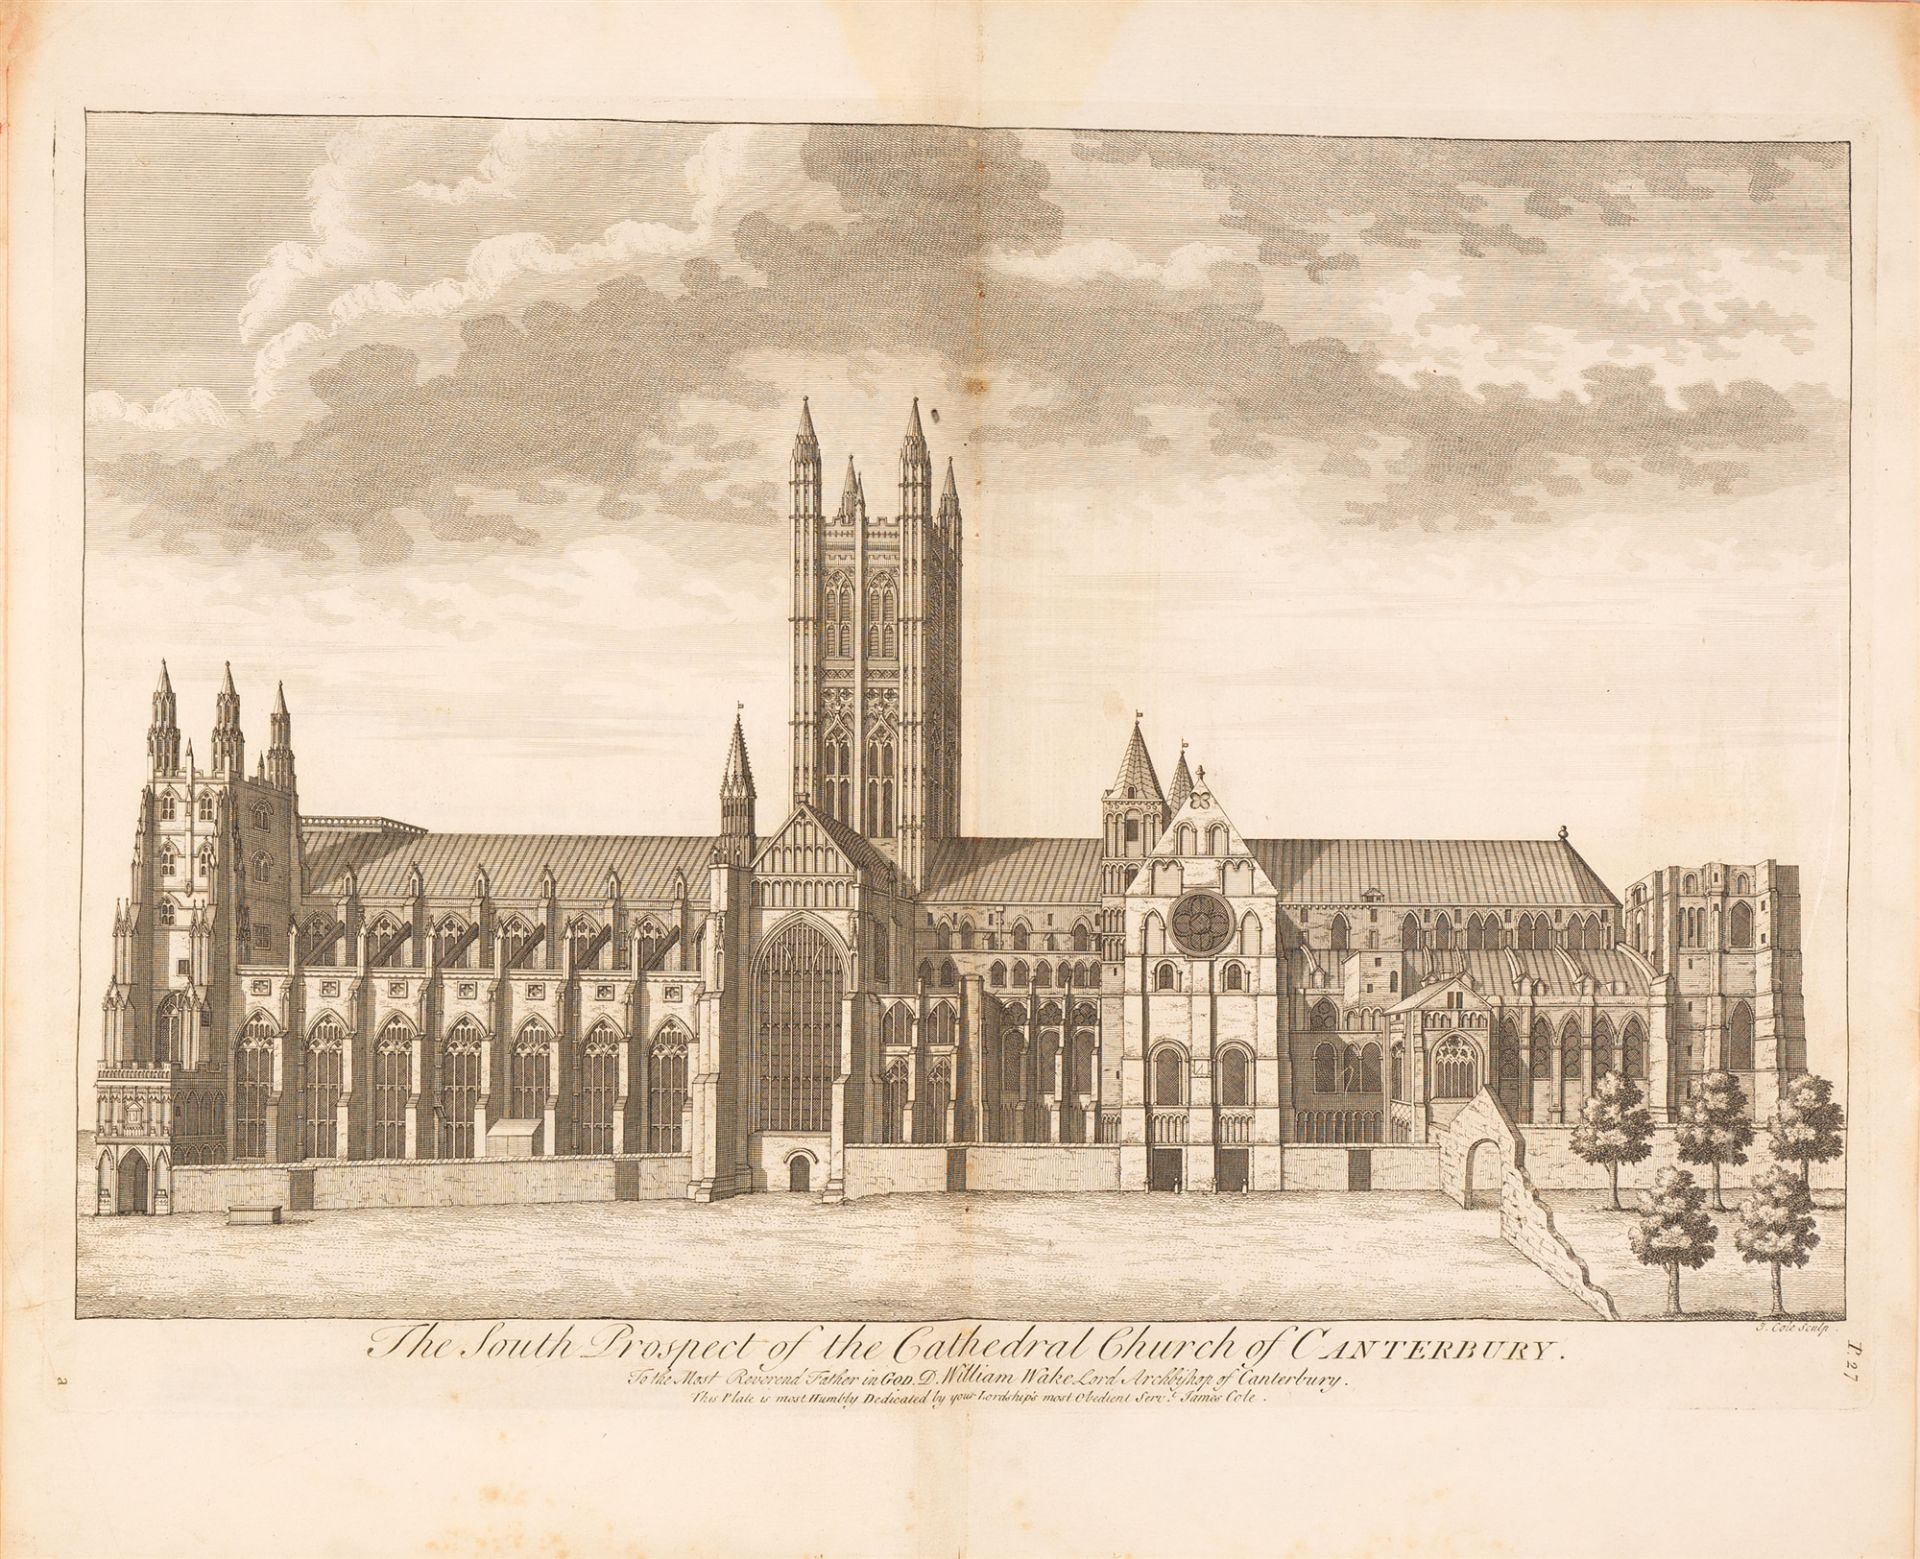 J. Dart, The History and Antiquities of the Cathedral Church of Canterbury. London 1726.